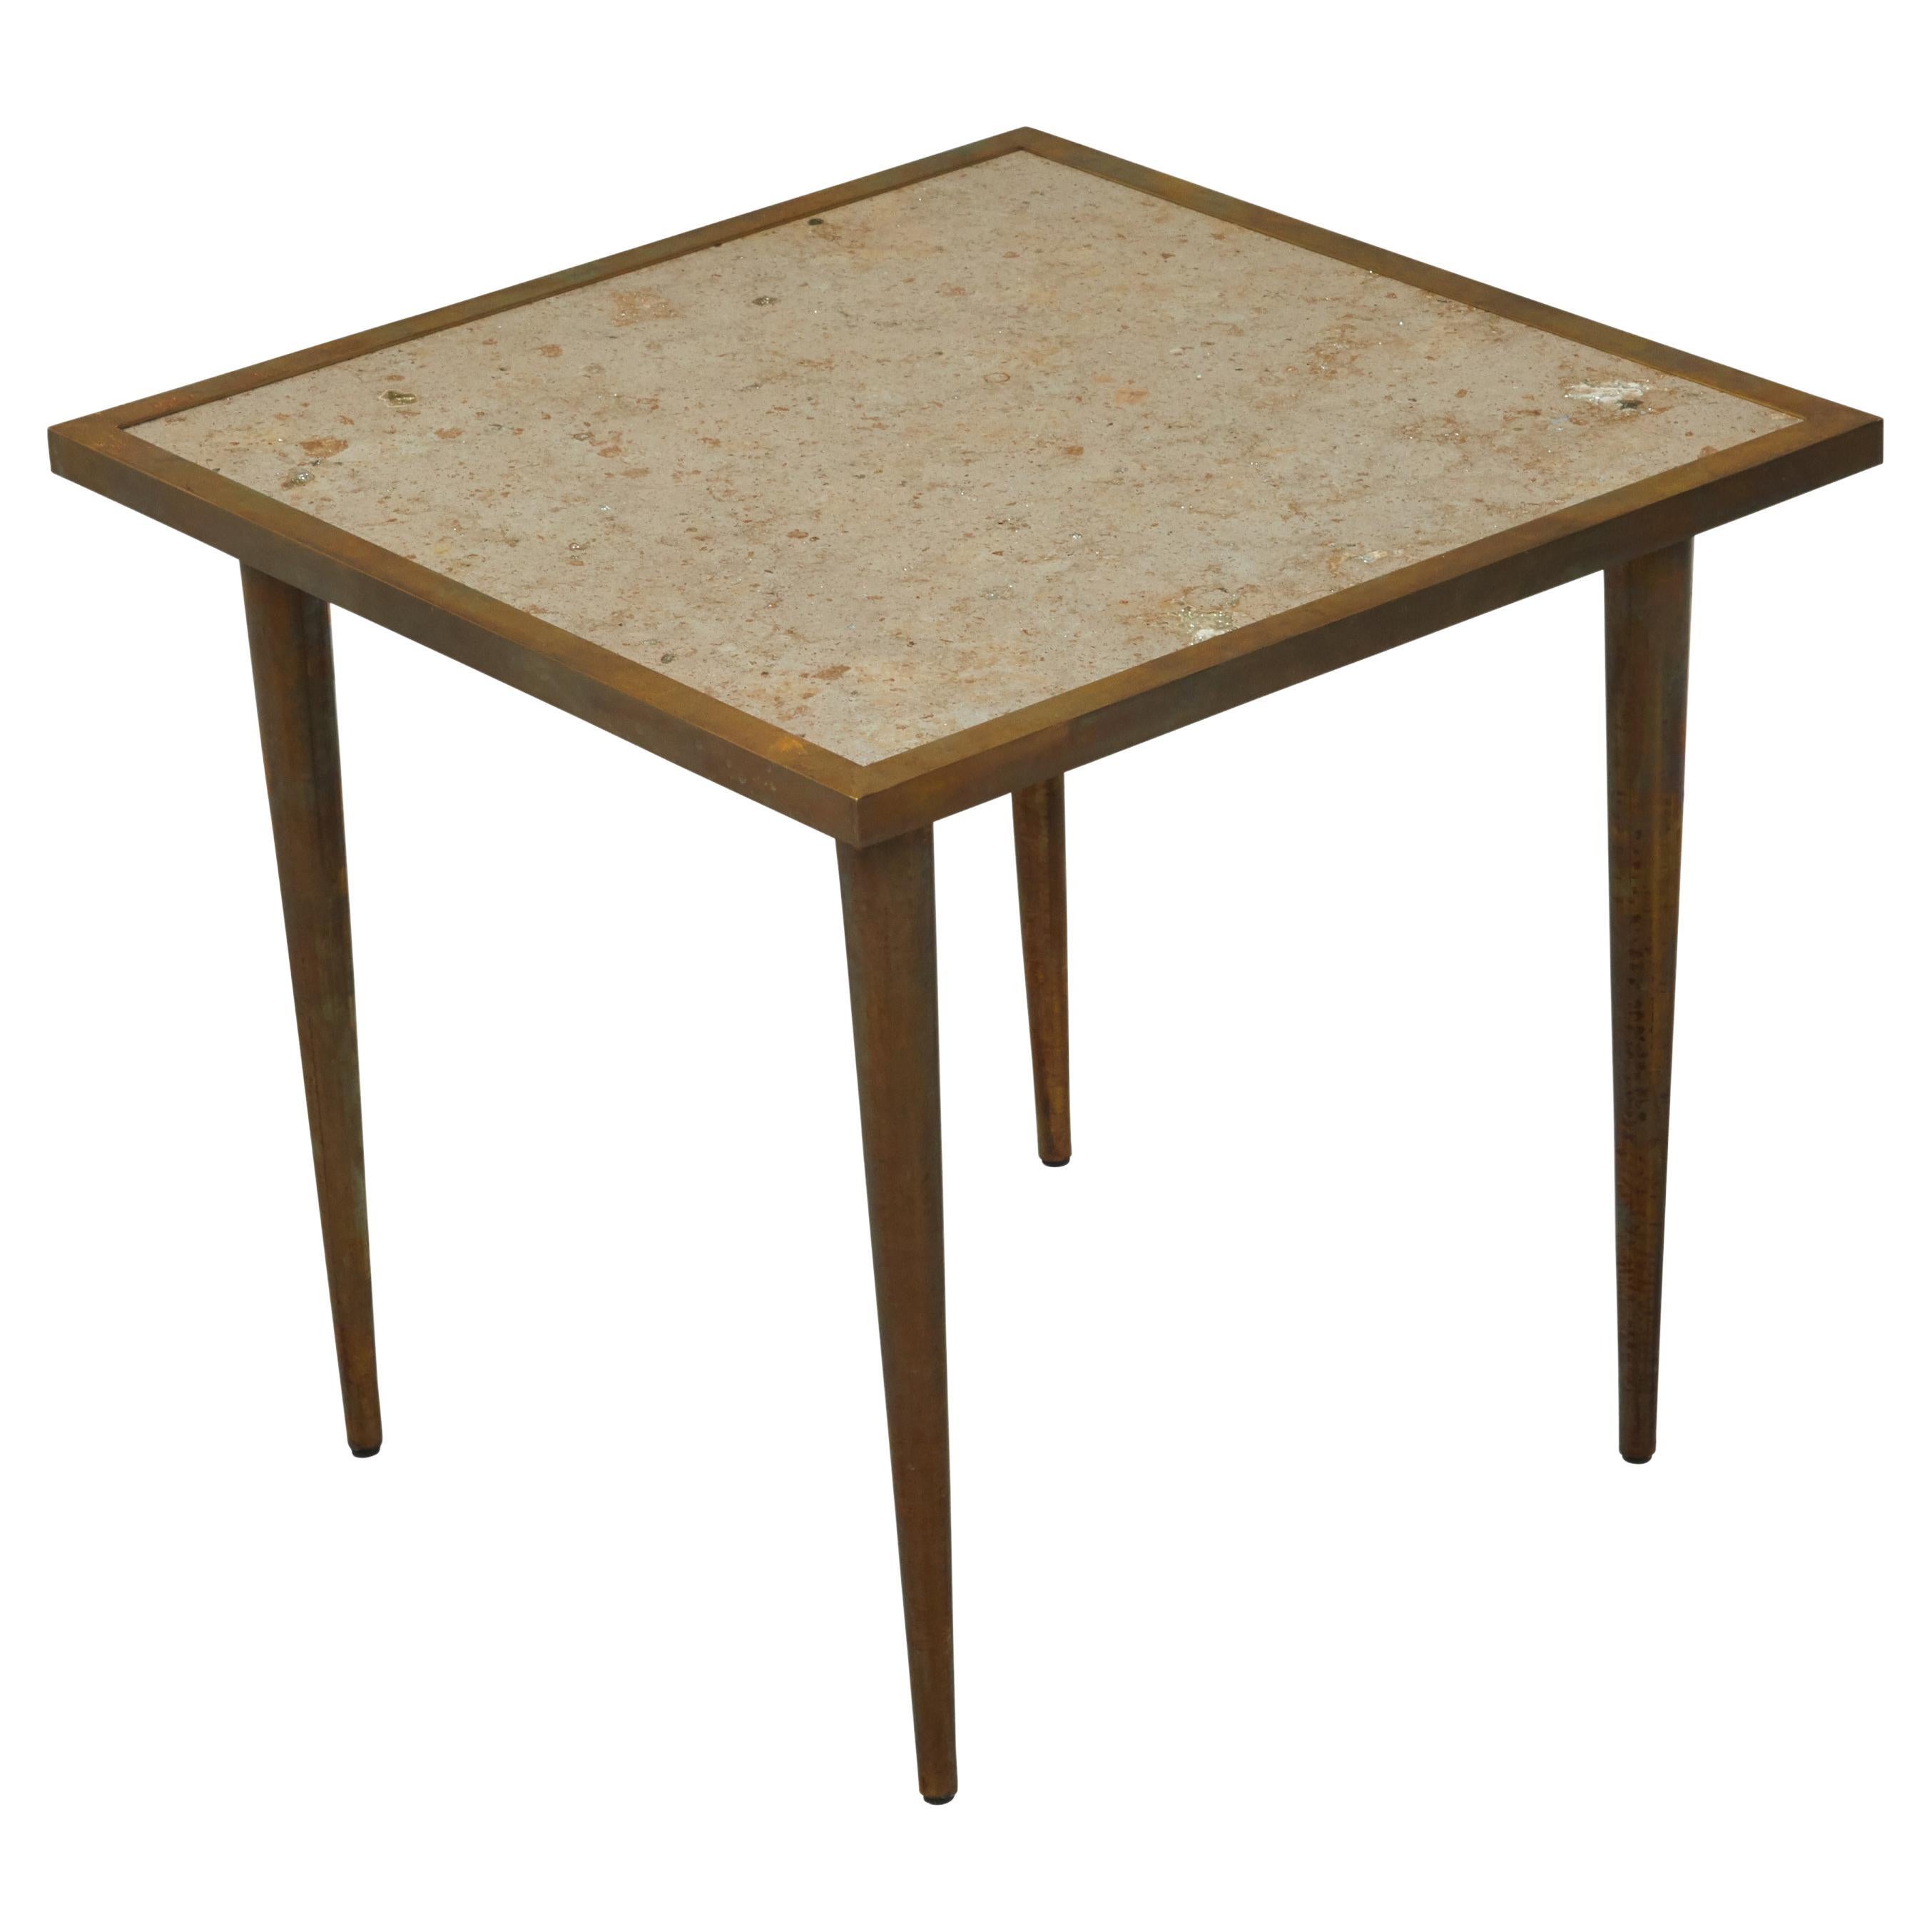 Italian Midcentury Brass Coffee Table with Marble Top and Tapered Legs